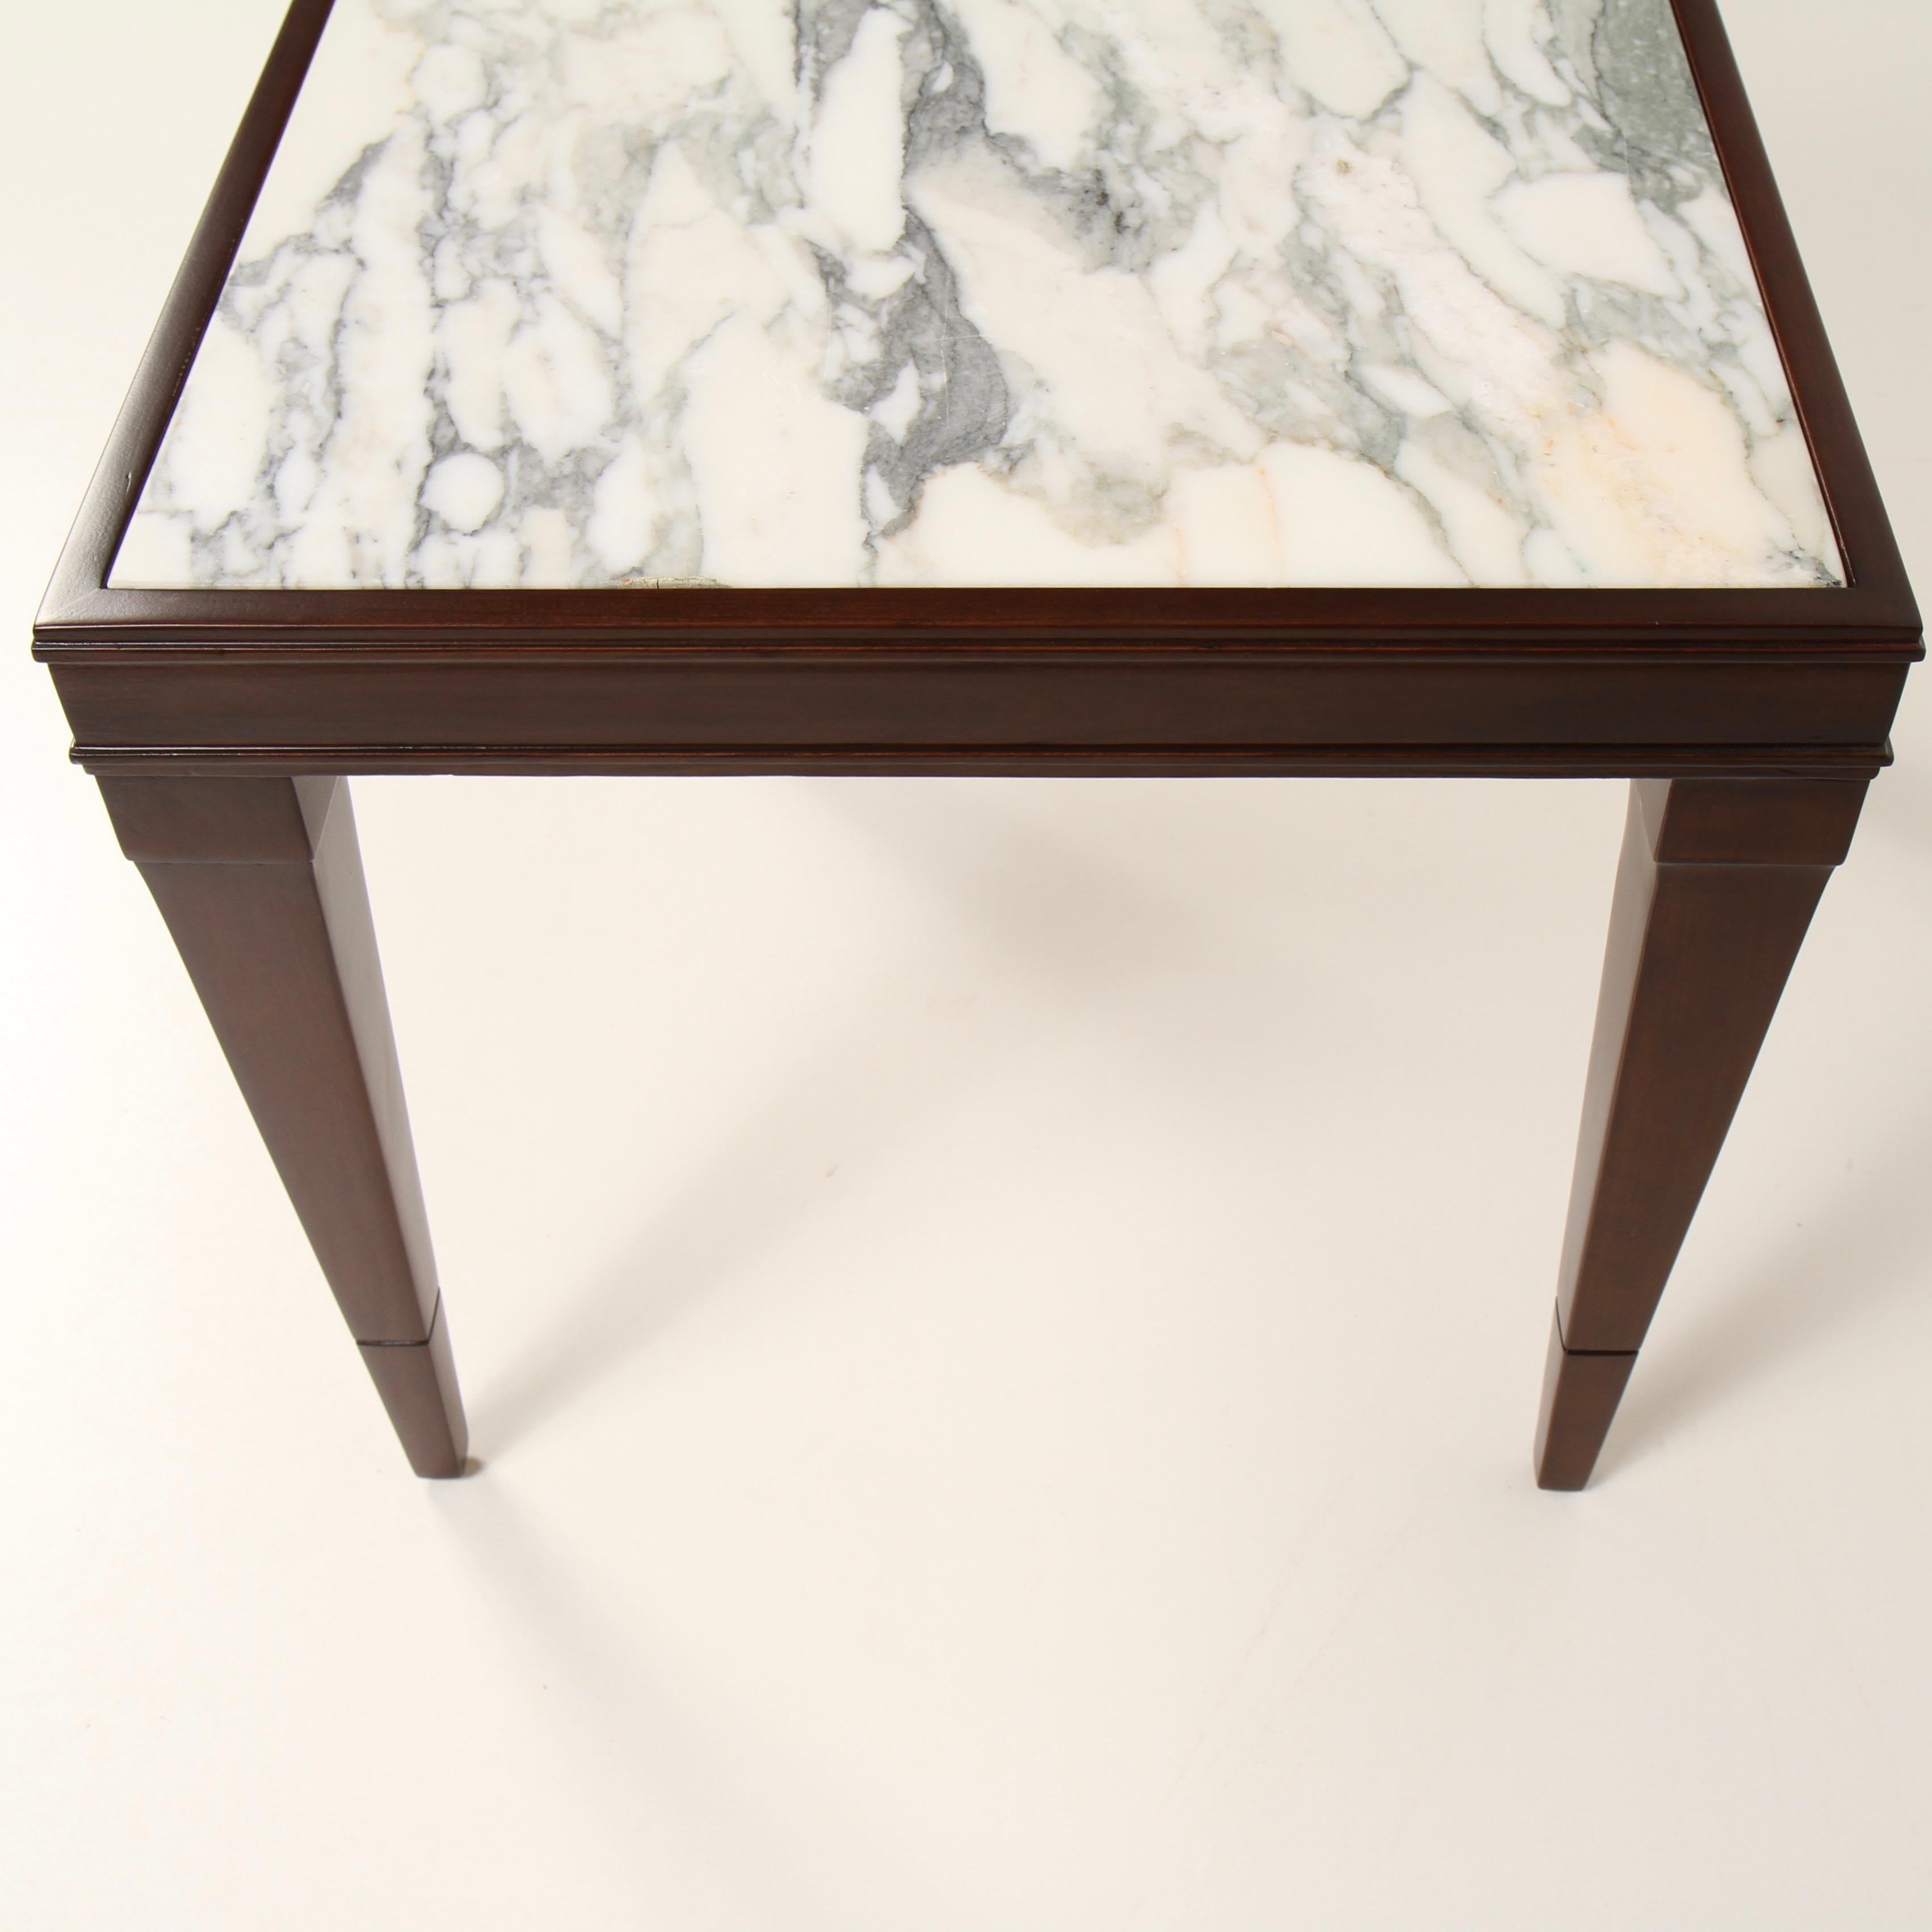 20th Century Marble Topped Side Table by Burkey For Sale